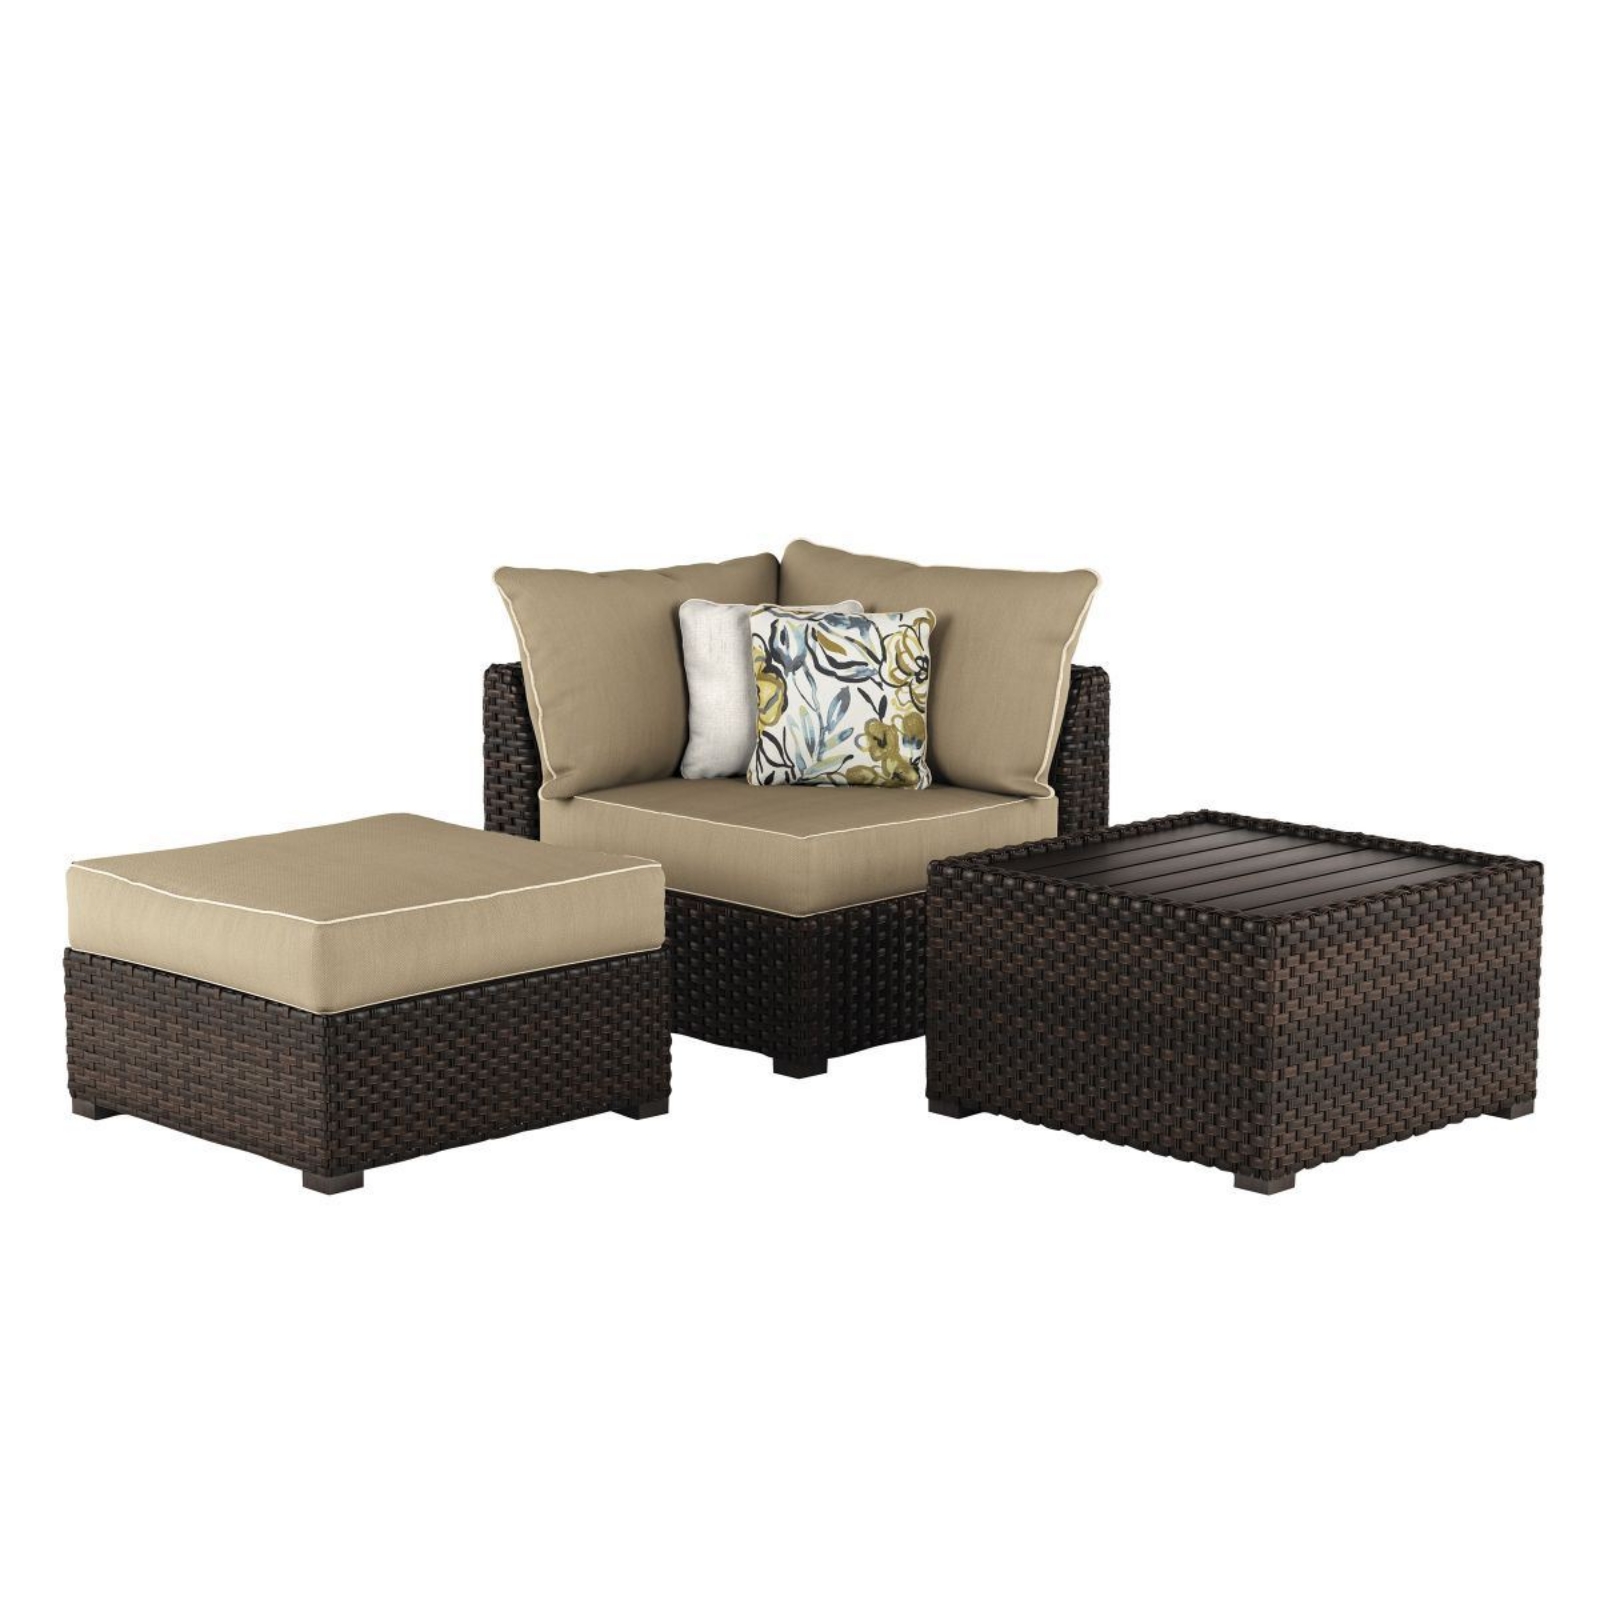 Picture of Spring Ridge Patio Corner Chair, Table & Ottoman